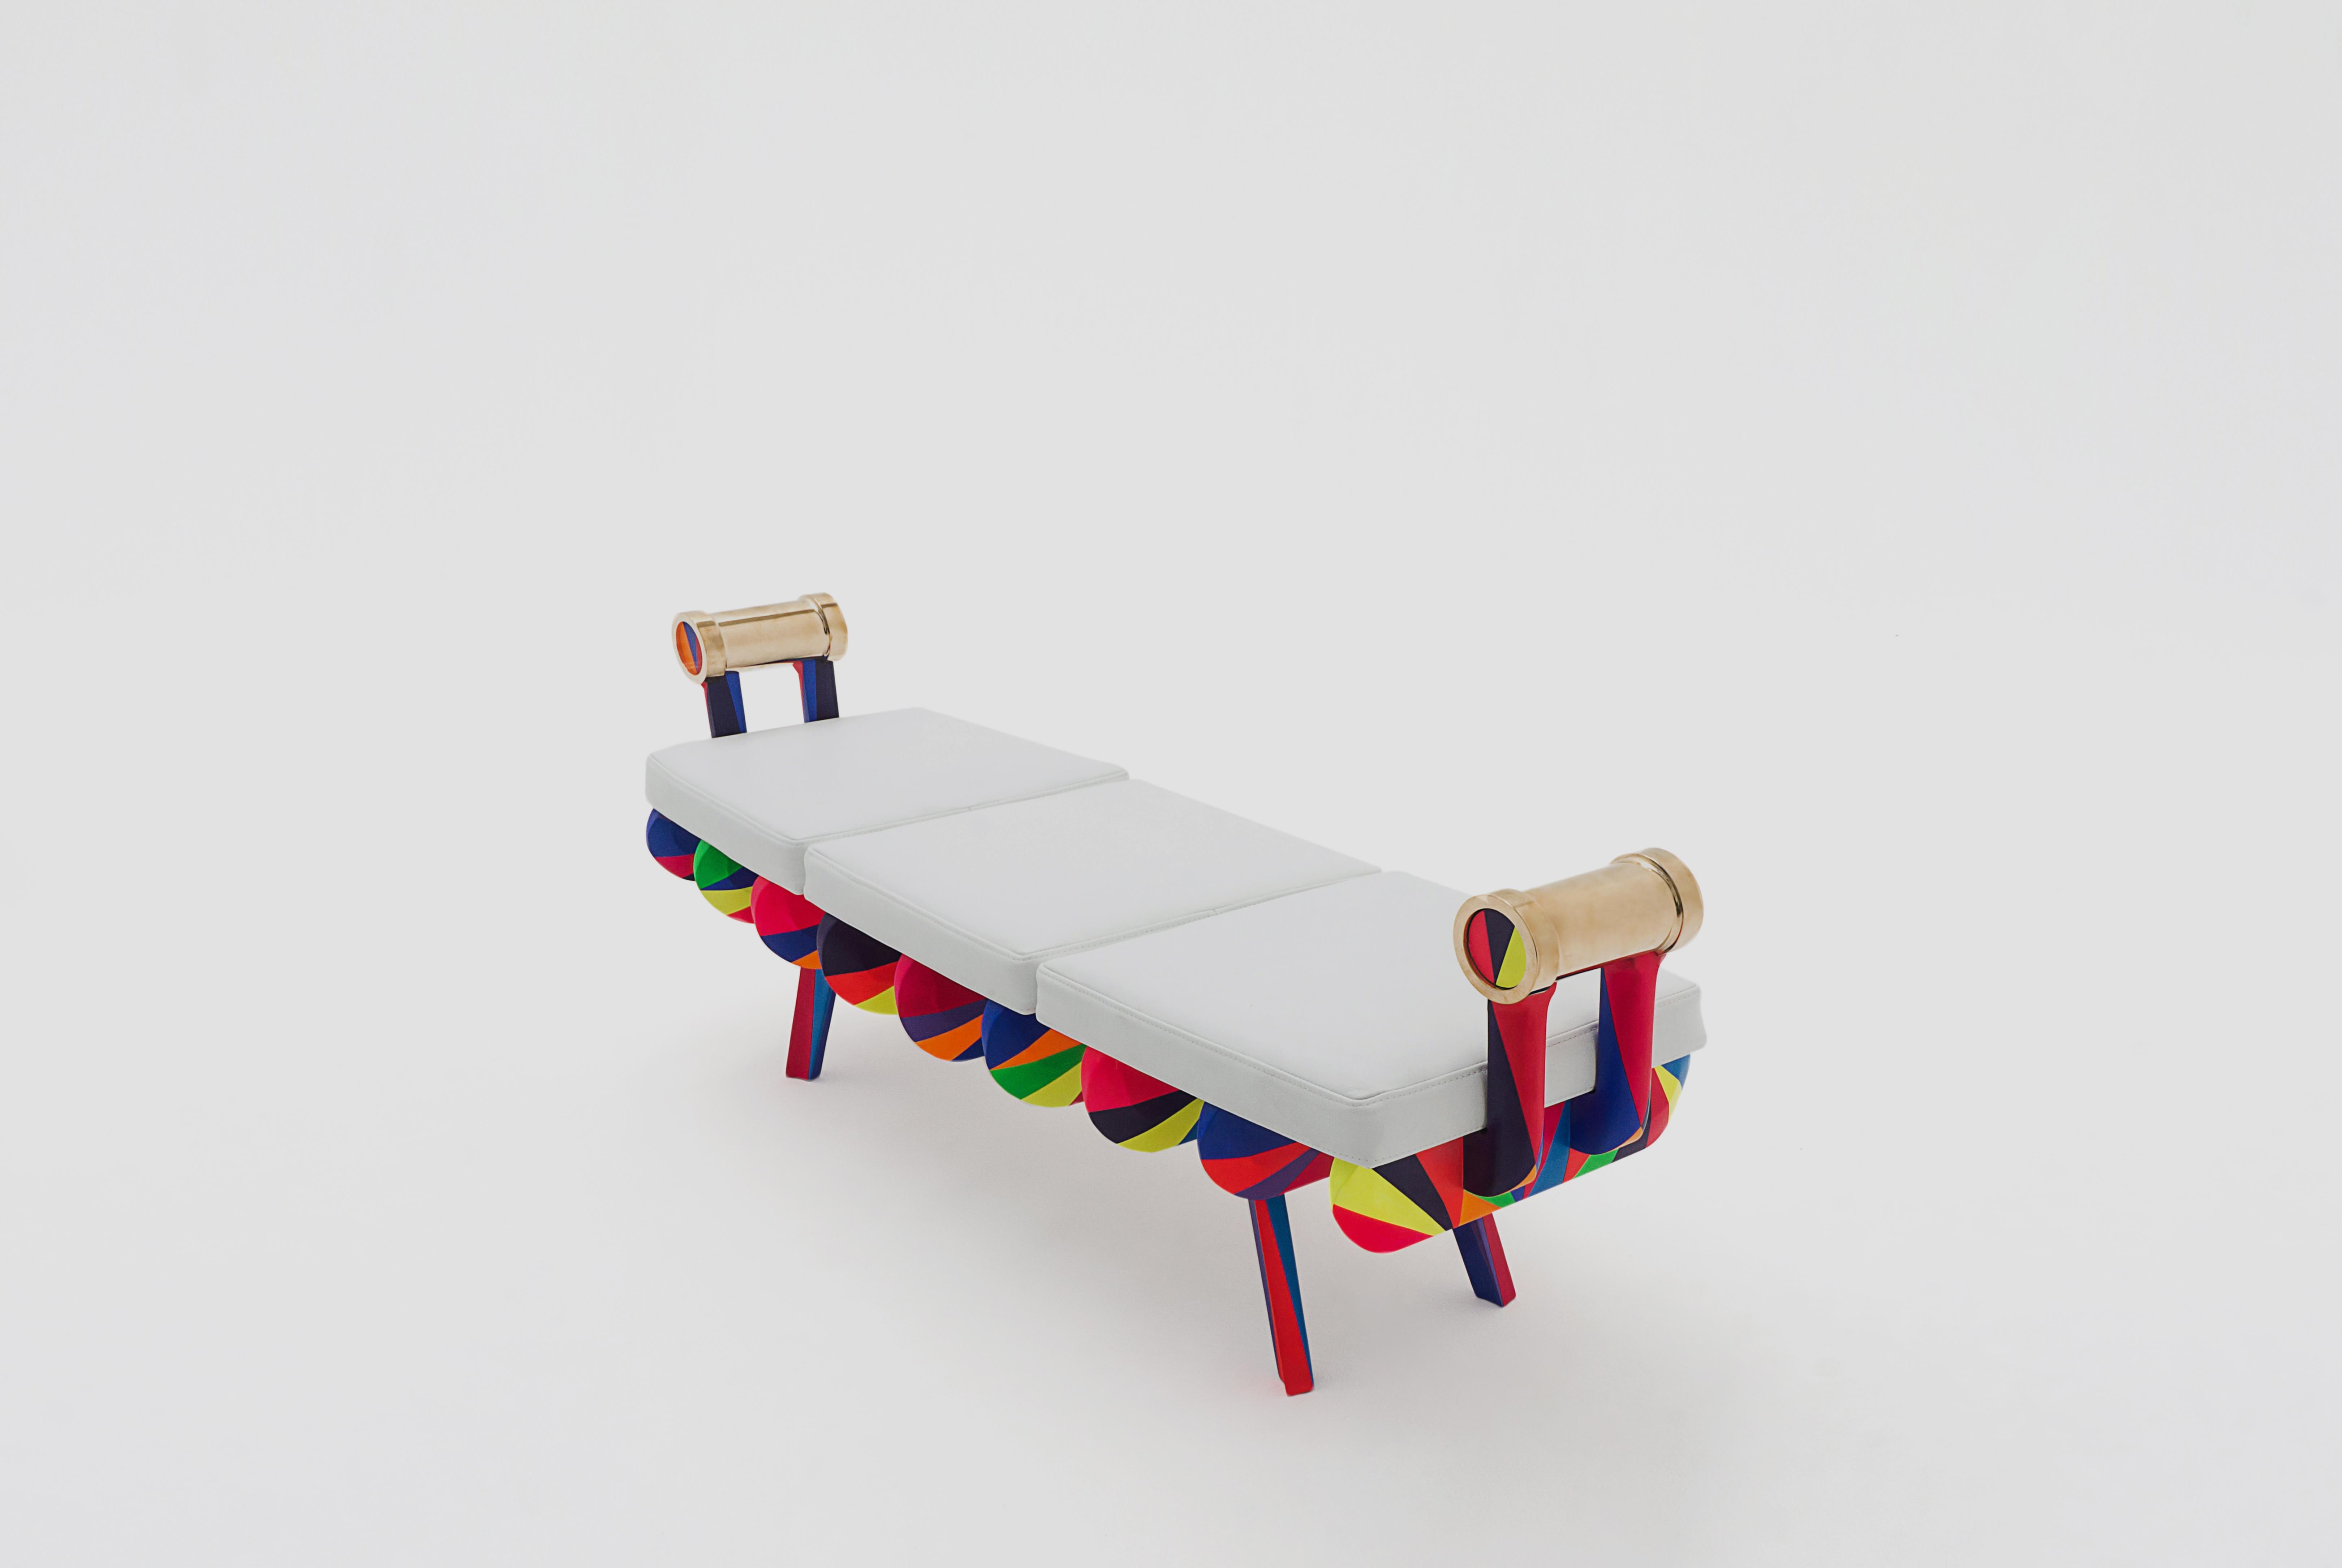 Special Edition Gor bench by Arturo Verástegui
Dimensions: D 60 x W 160 x H 50 cm
Materials: wood, leather, bronze.

Bronze with white Sonora leather benc, intervened in lacquer by Lao Gabrielli.

Arturo Verástegui has been the director and